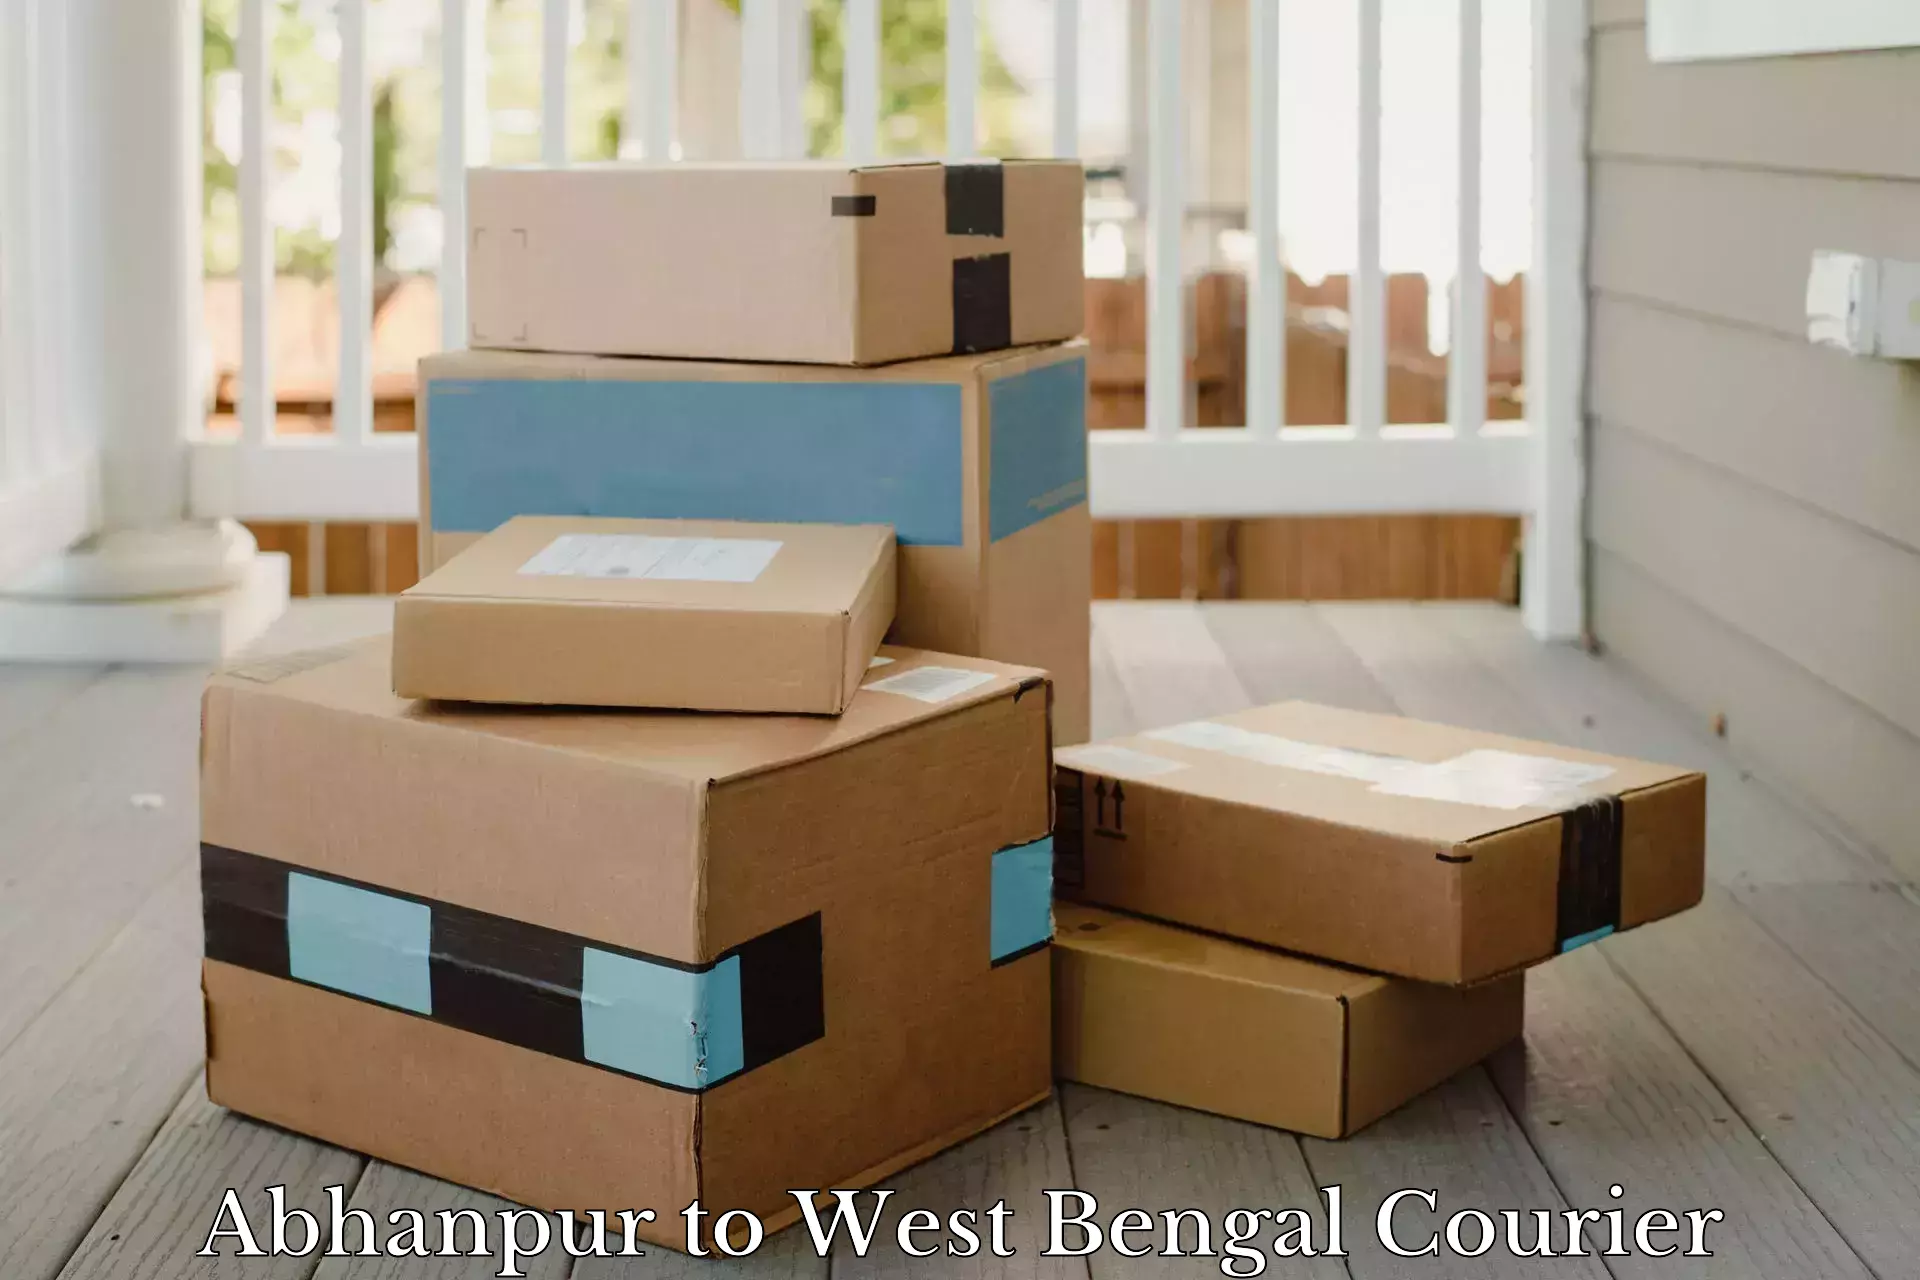 Reliable delivery network Abhanpur to Bhagabati